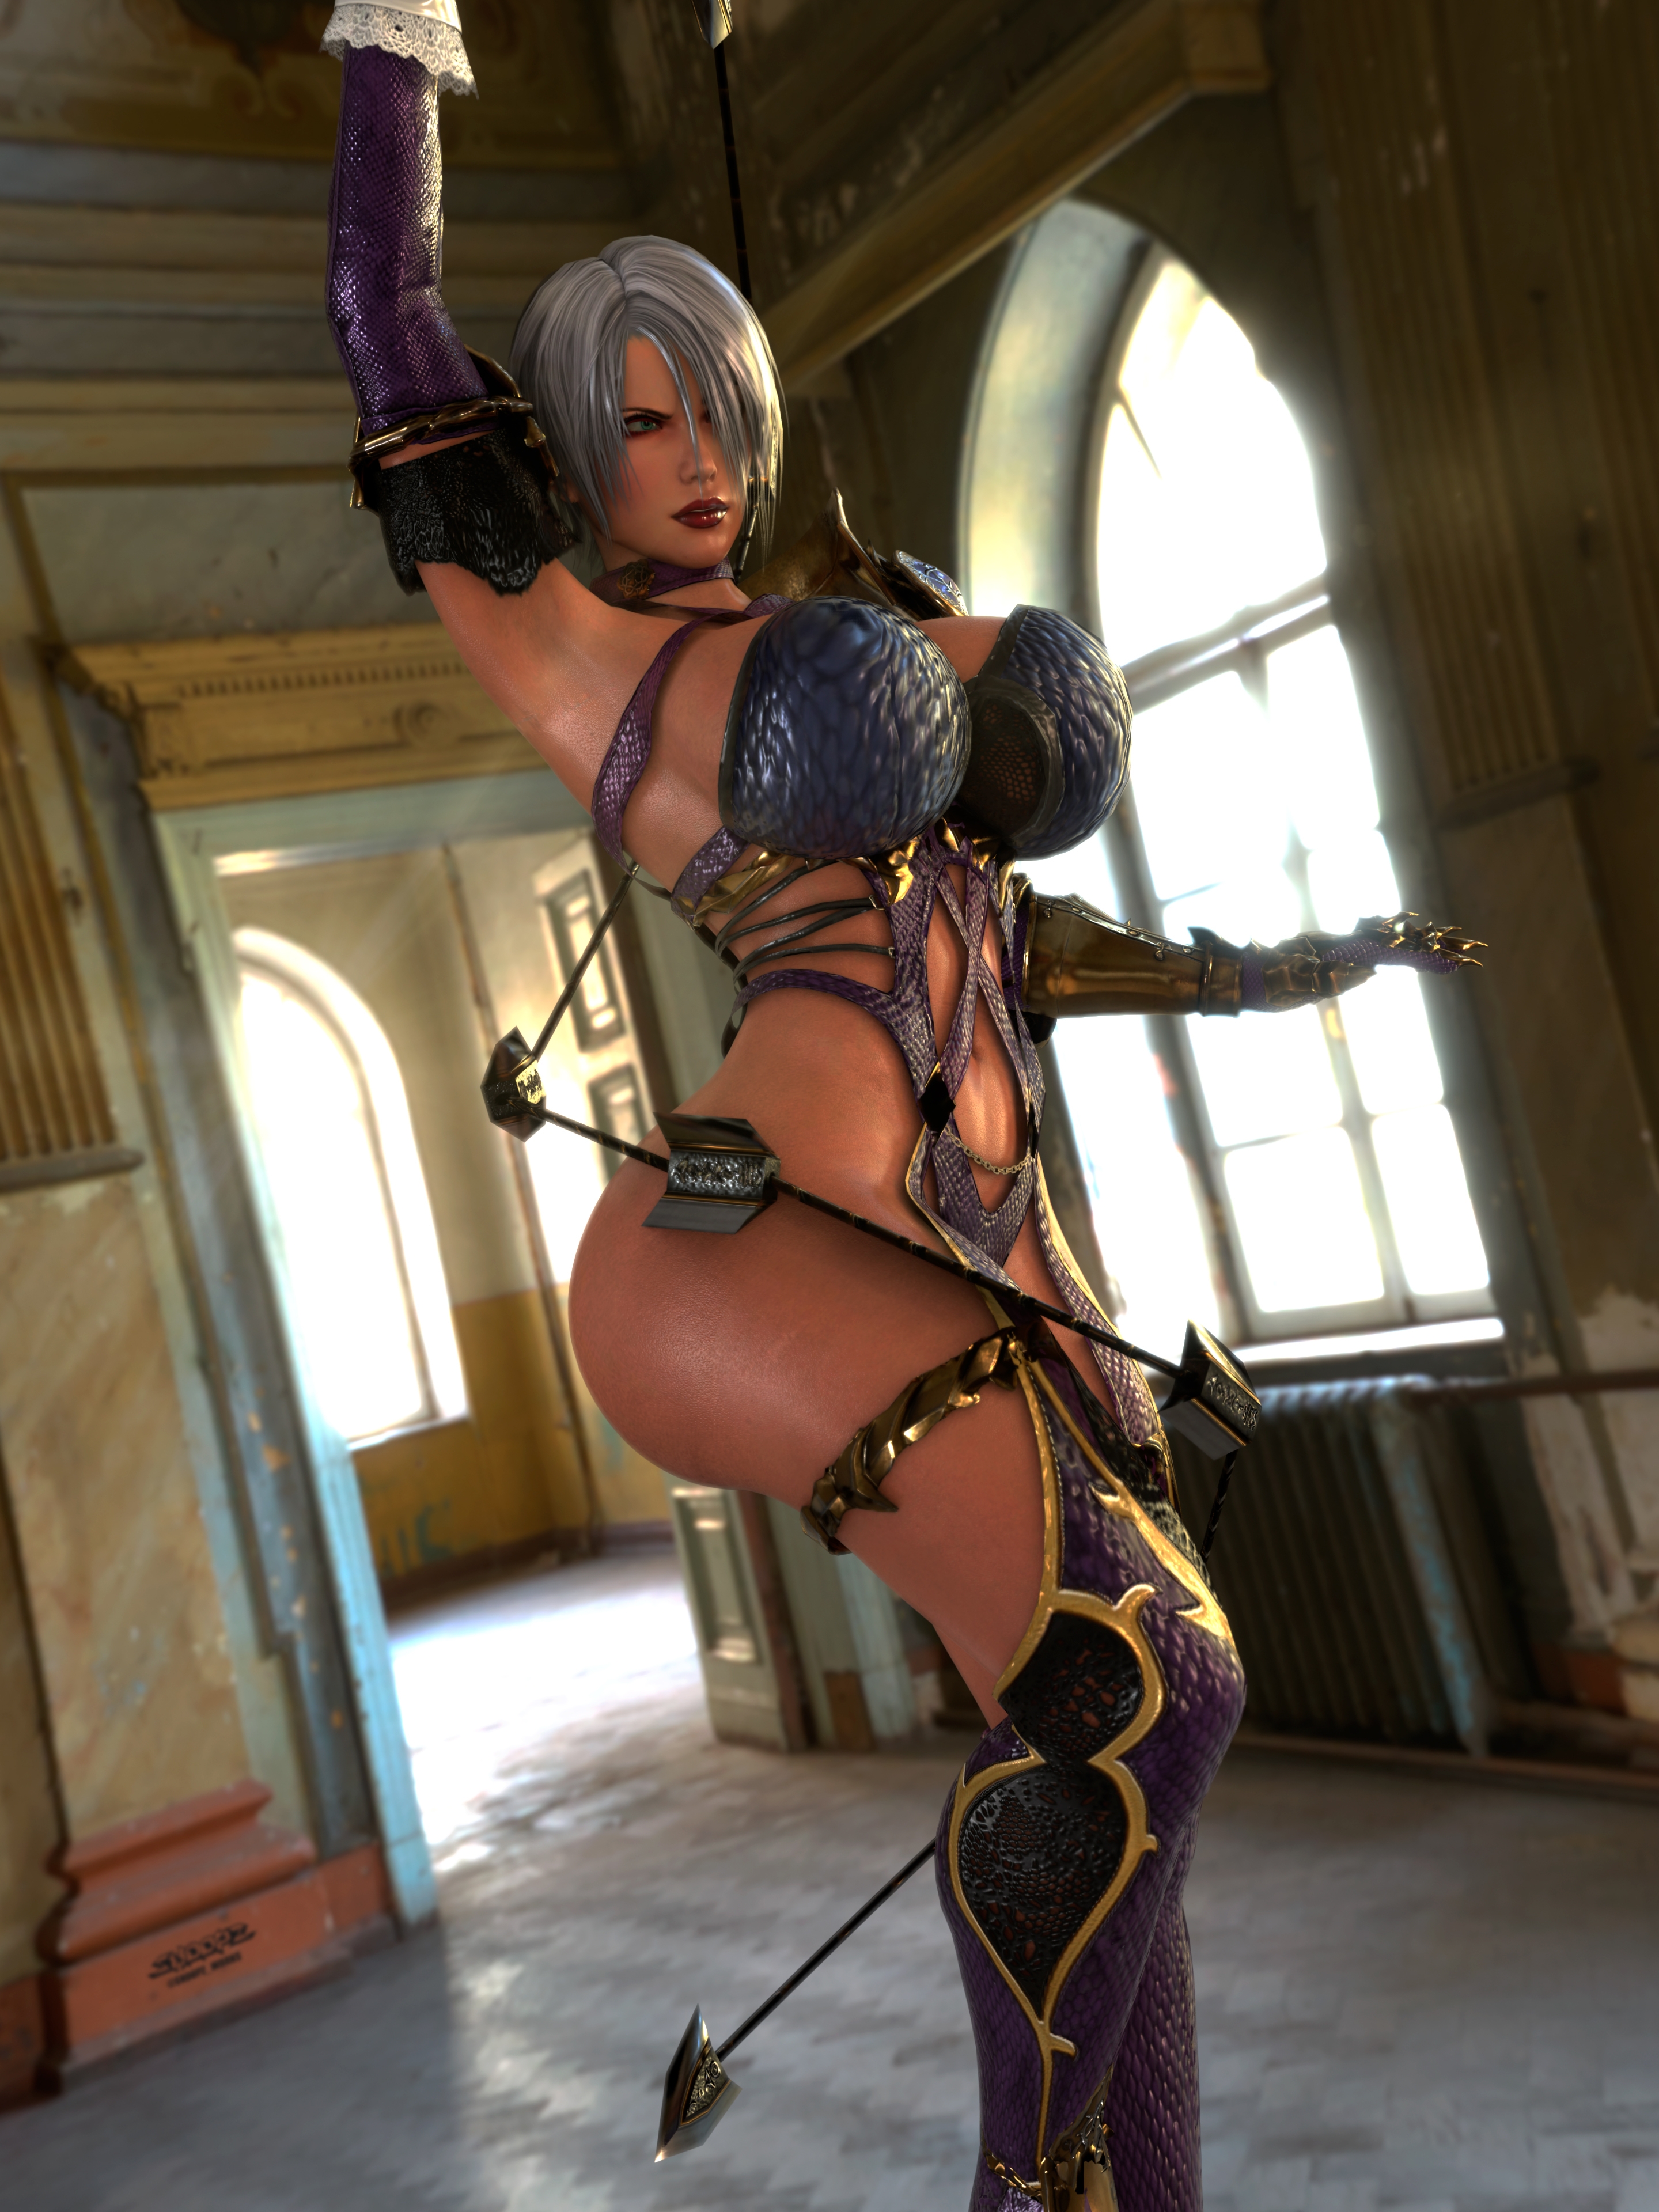 Ivy Valentine! One of my favorite characters! Ivy Valentine Soul Calibur Lingerie Back View Horny Face Ass Big boobs Boobs Sexy 3d Porn